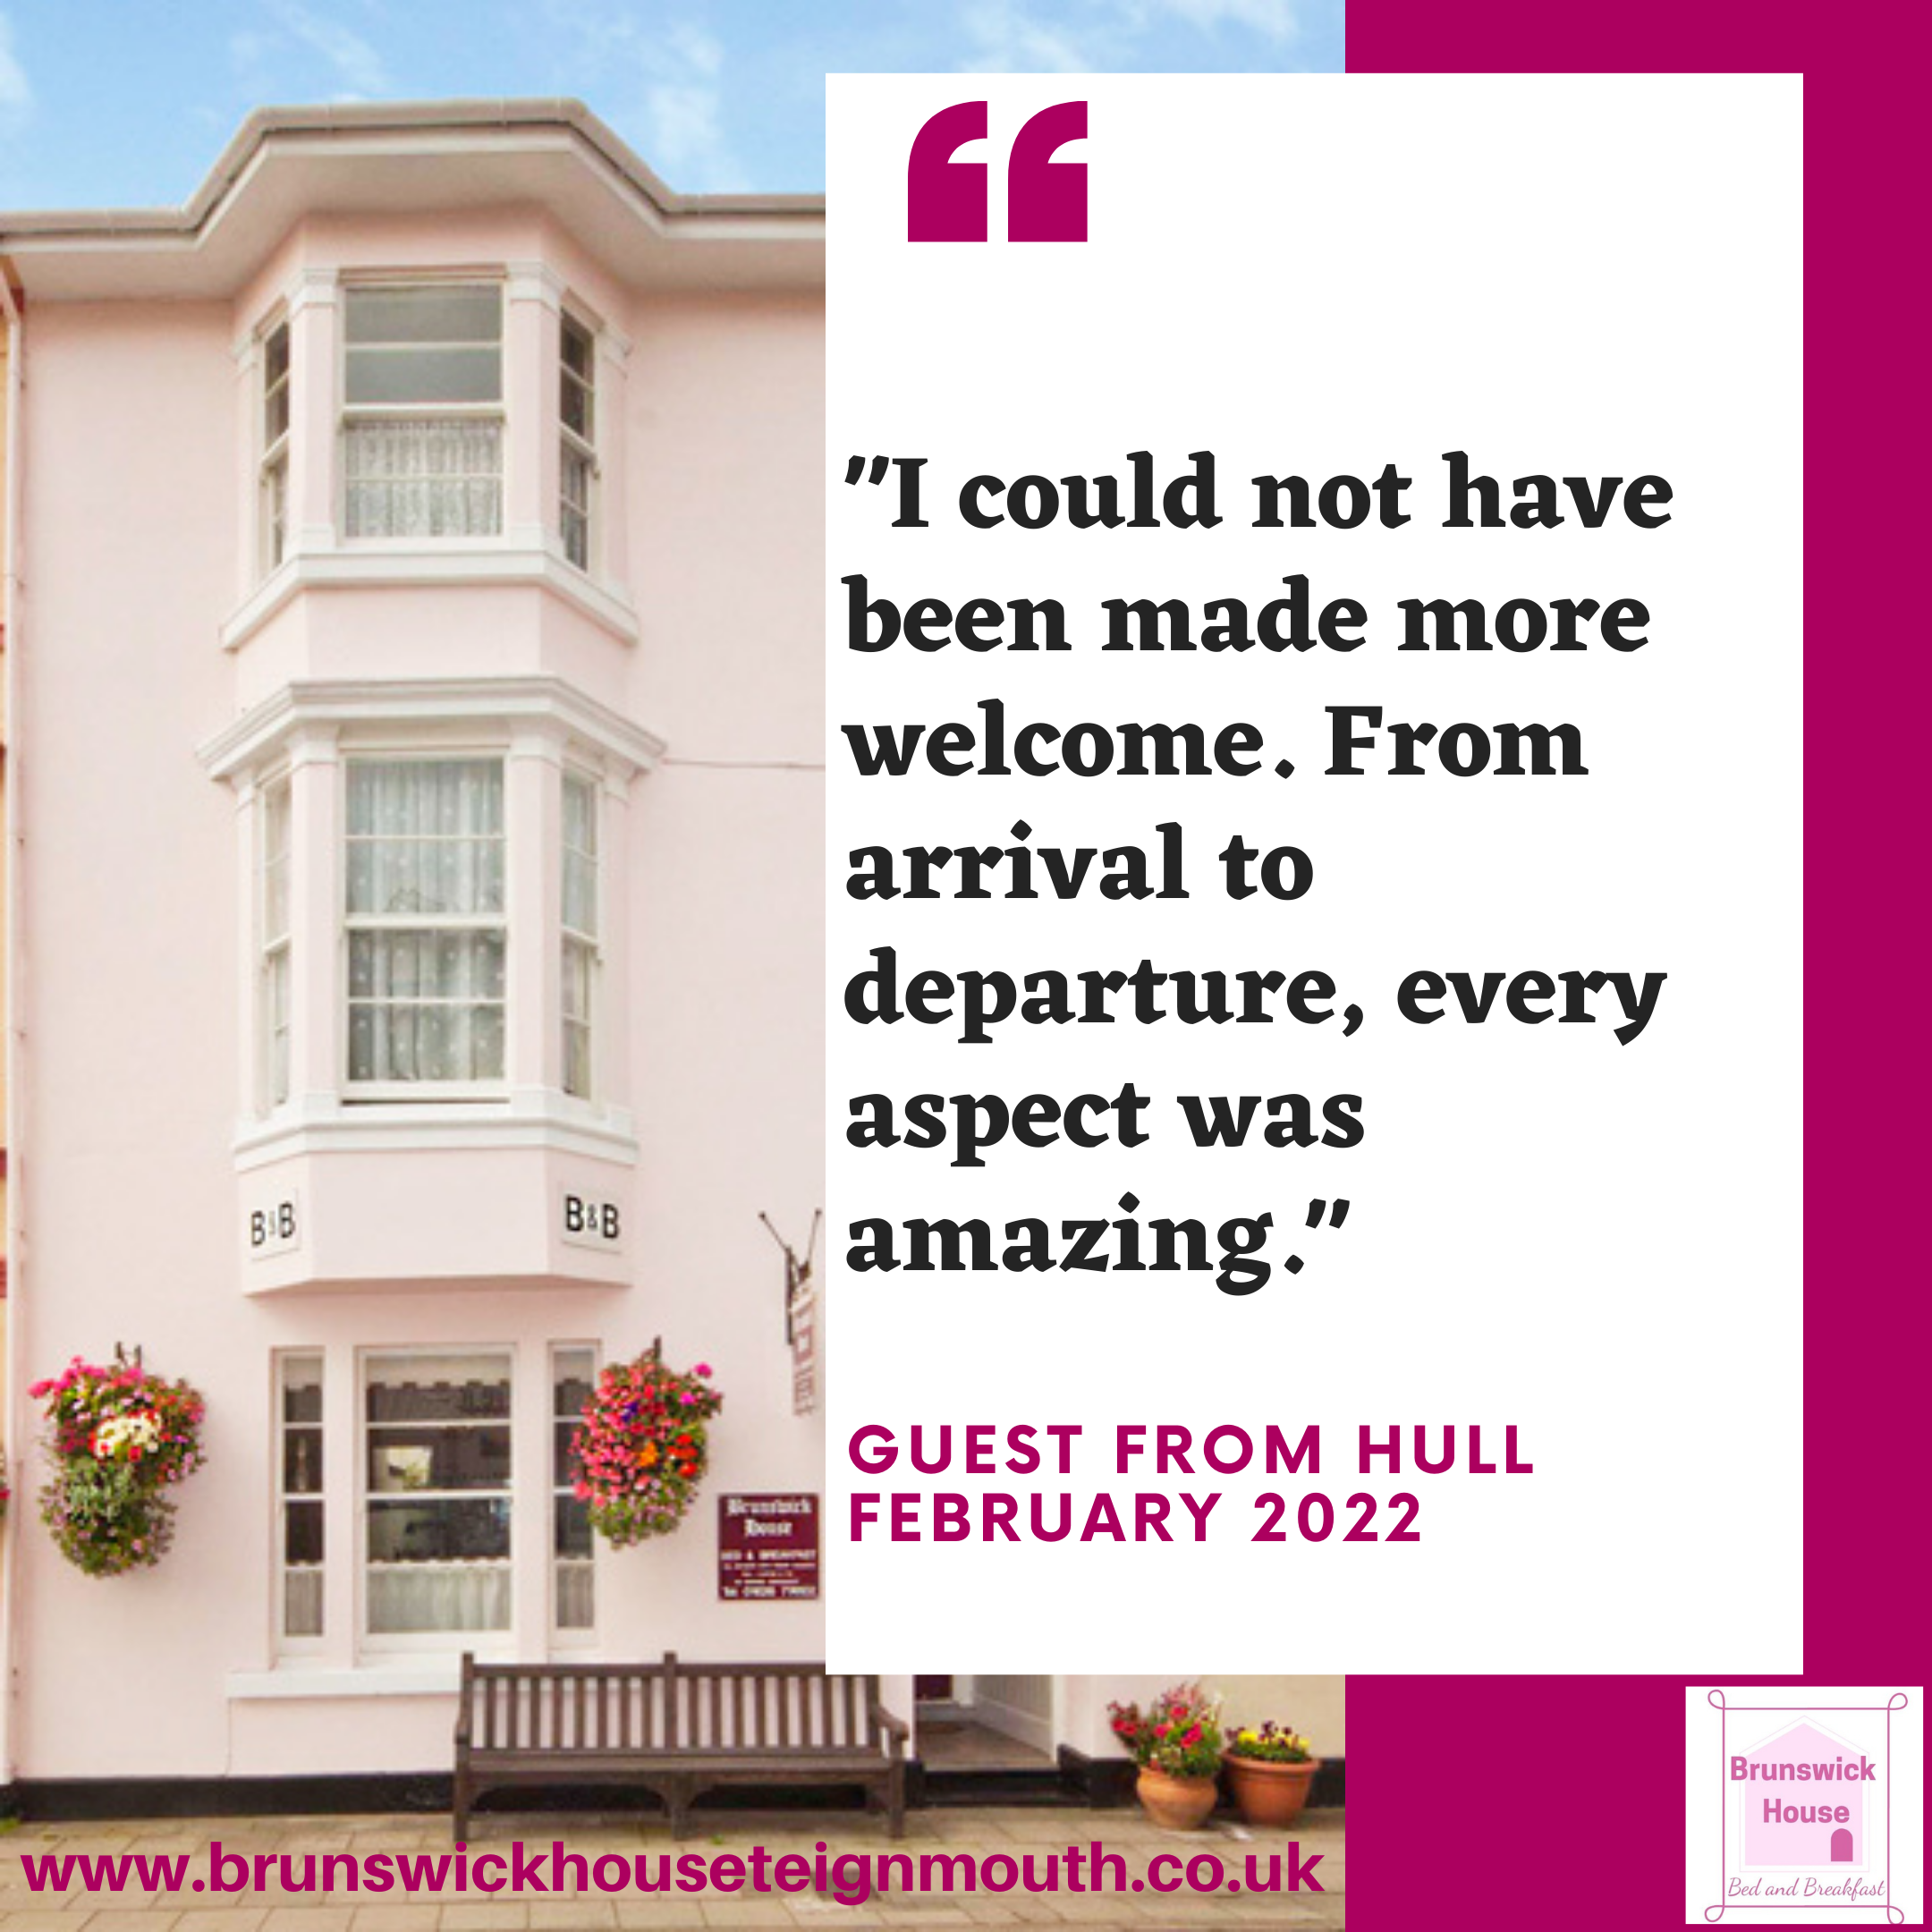 Review that says how welcoming guests found Brunswick House Bed and Breakfast Teignmouth